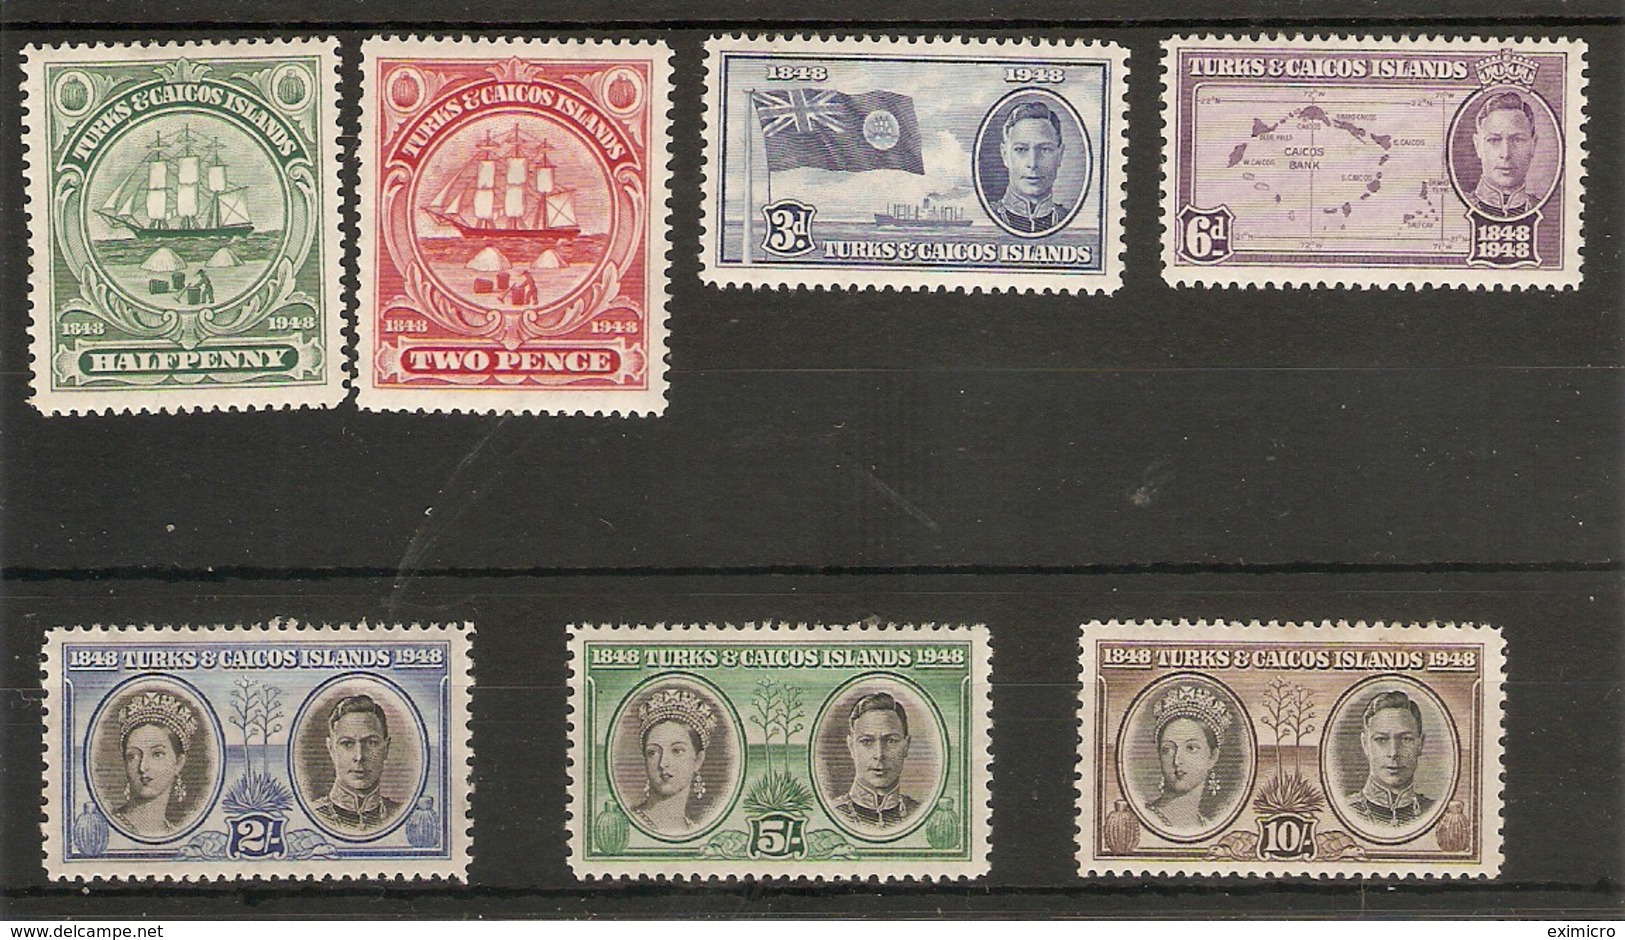 TURKS AND CAICOS ISLANDS 1948 CENTENARY SET SG 210/216 MOUNTED MINT Cat £14 - Turks And Caicos